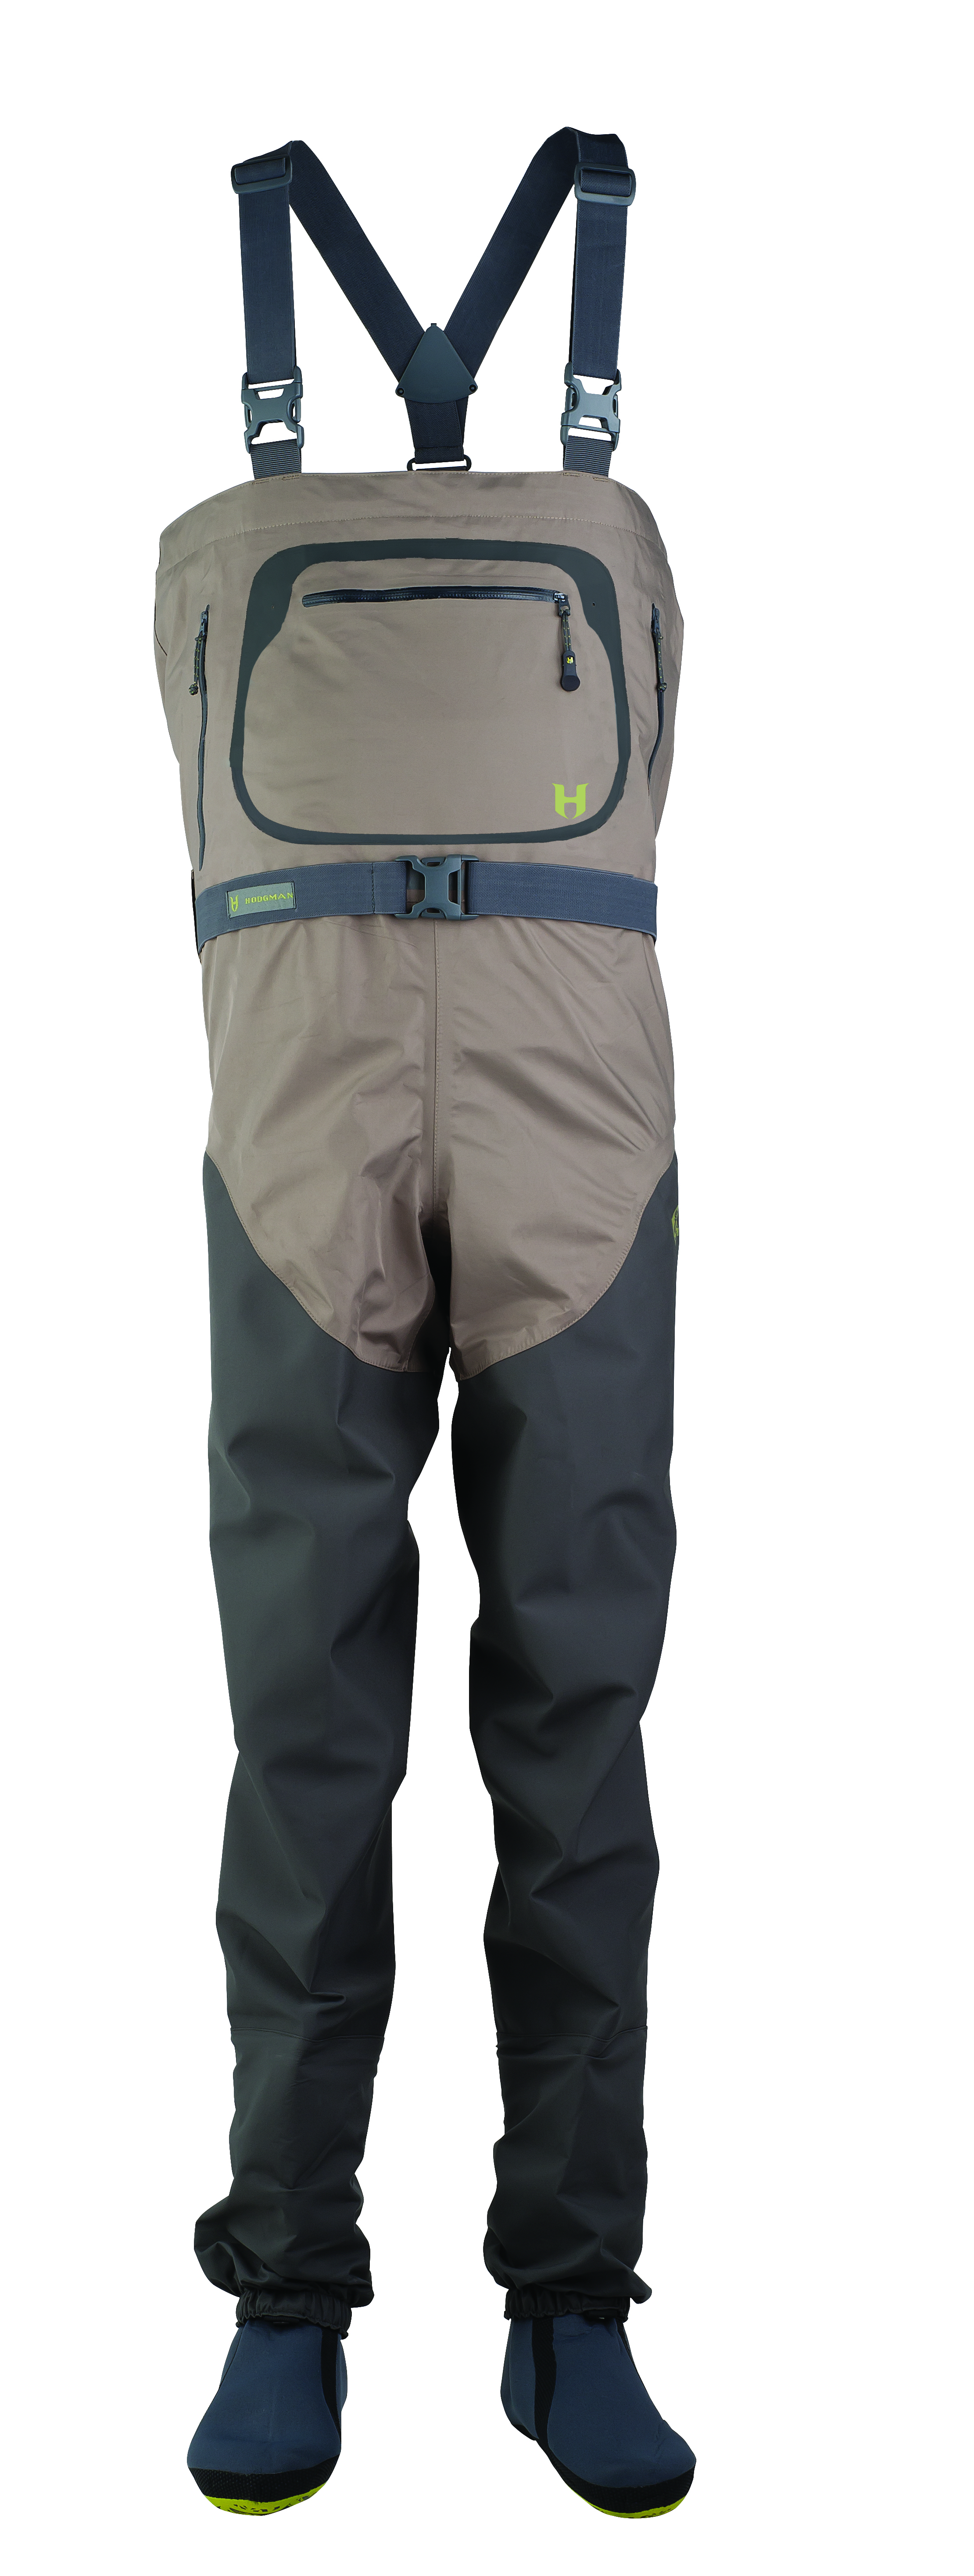 Details about   NEW Hodgman Pipestone Breathable Stockingfoot Chest Wader w Work Table 7Men 9wm 